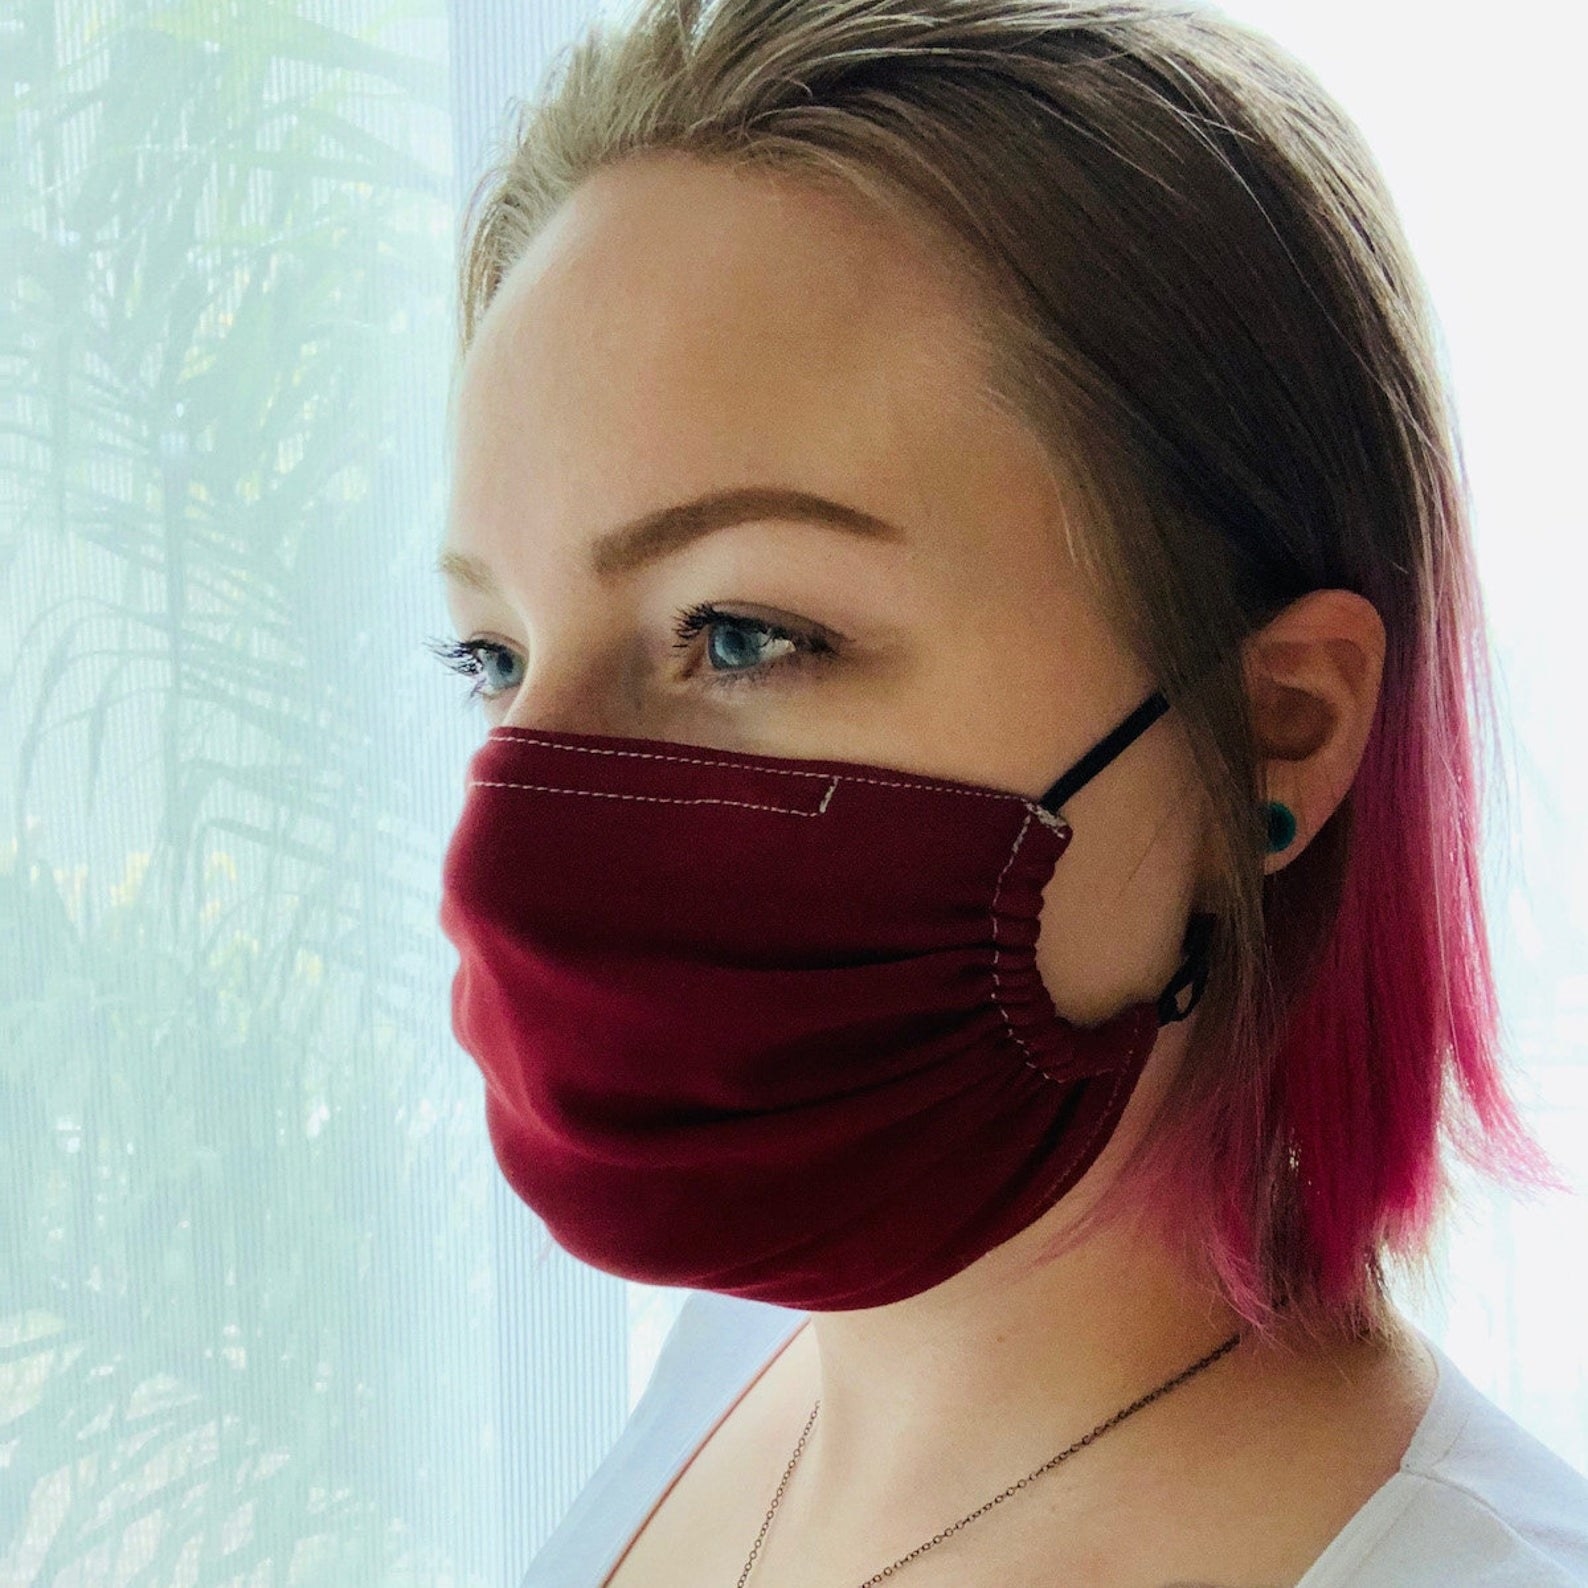 A model in a red face mask